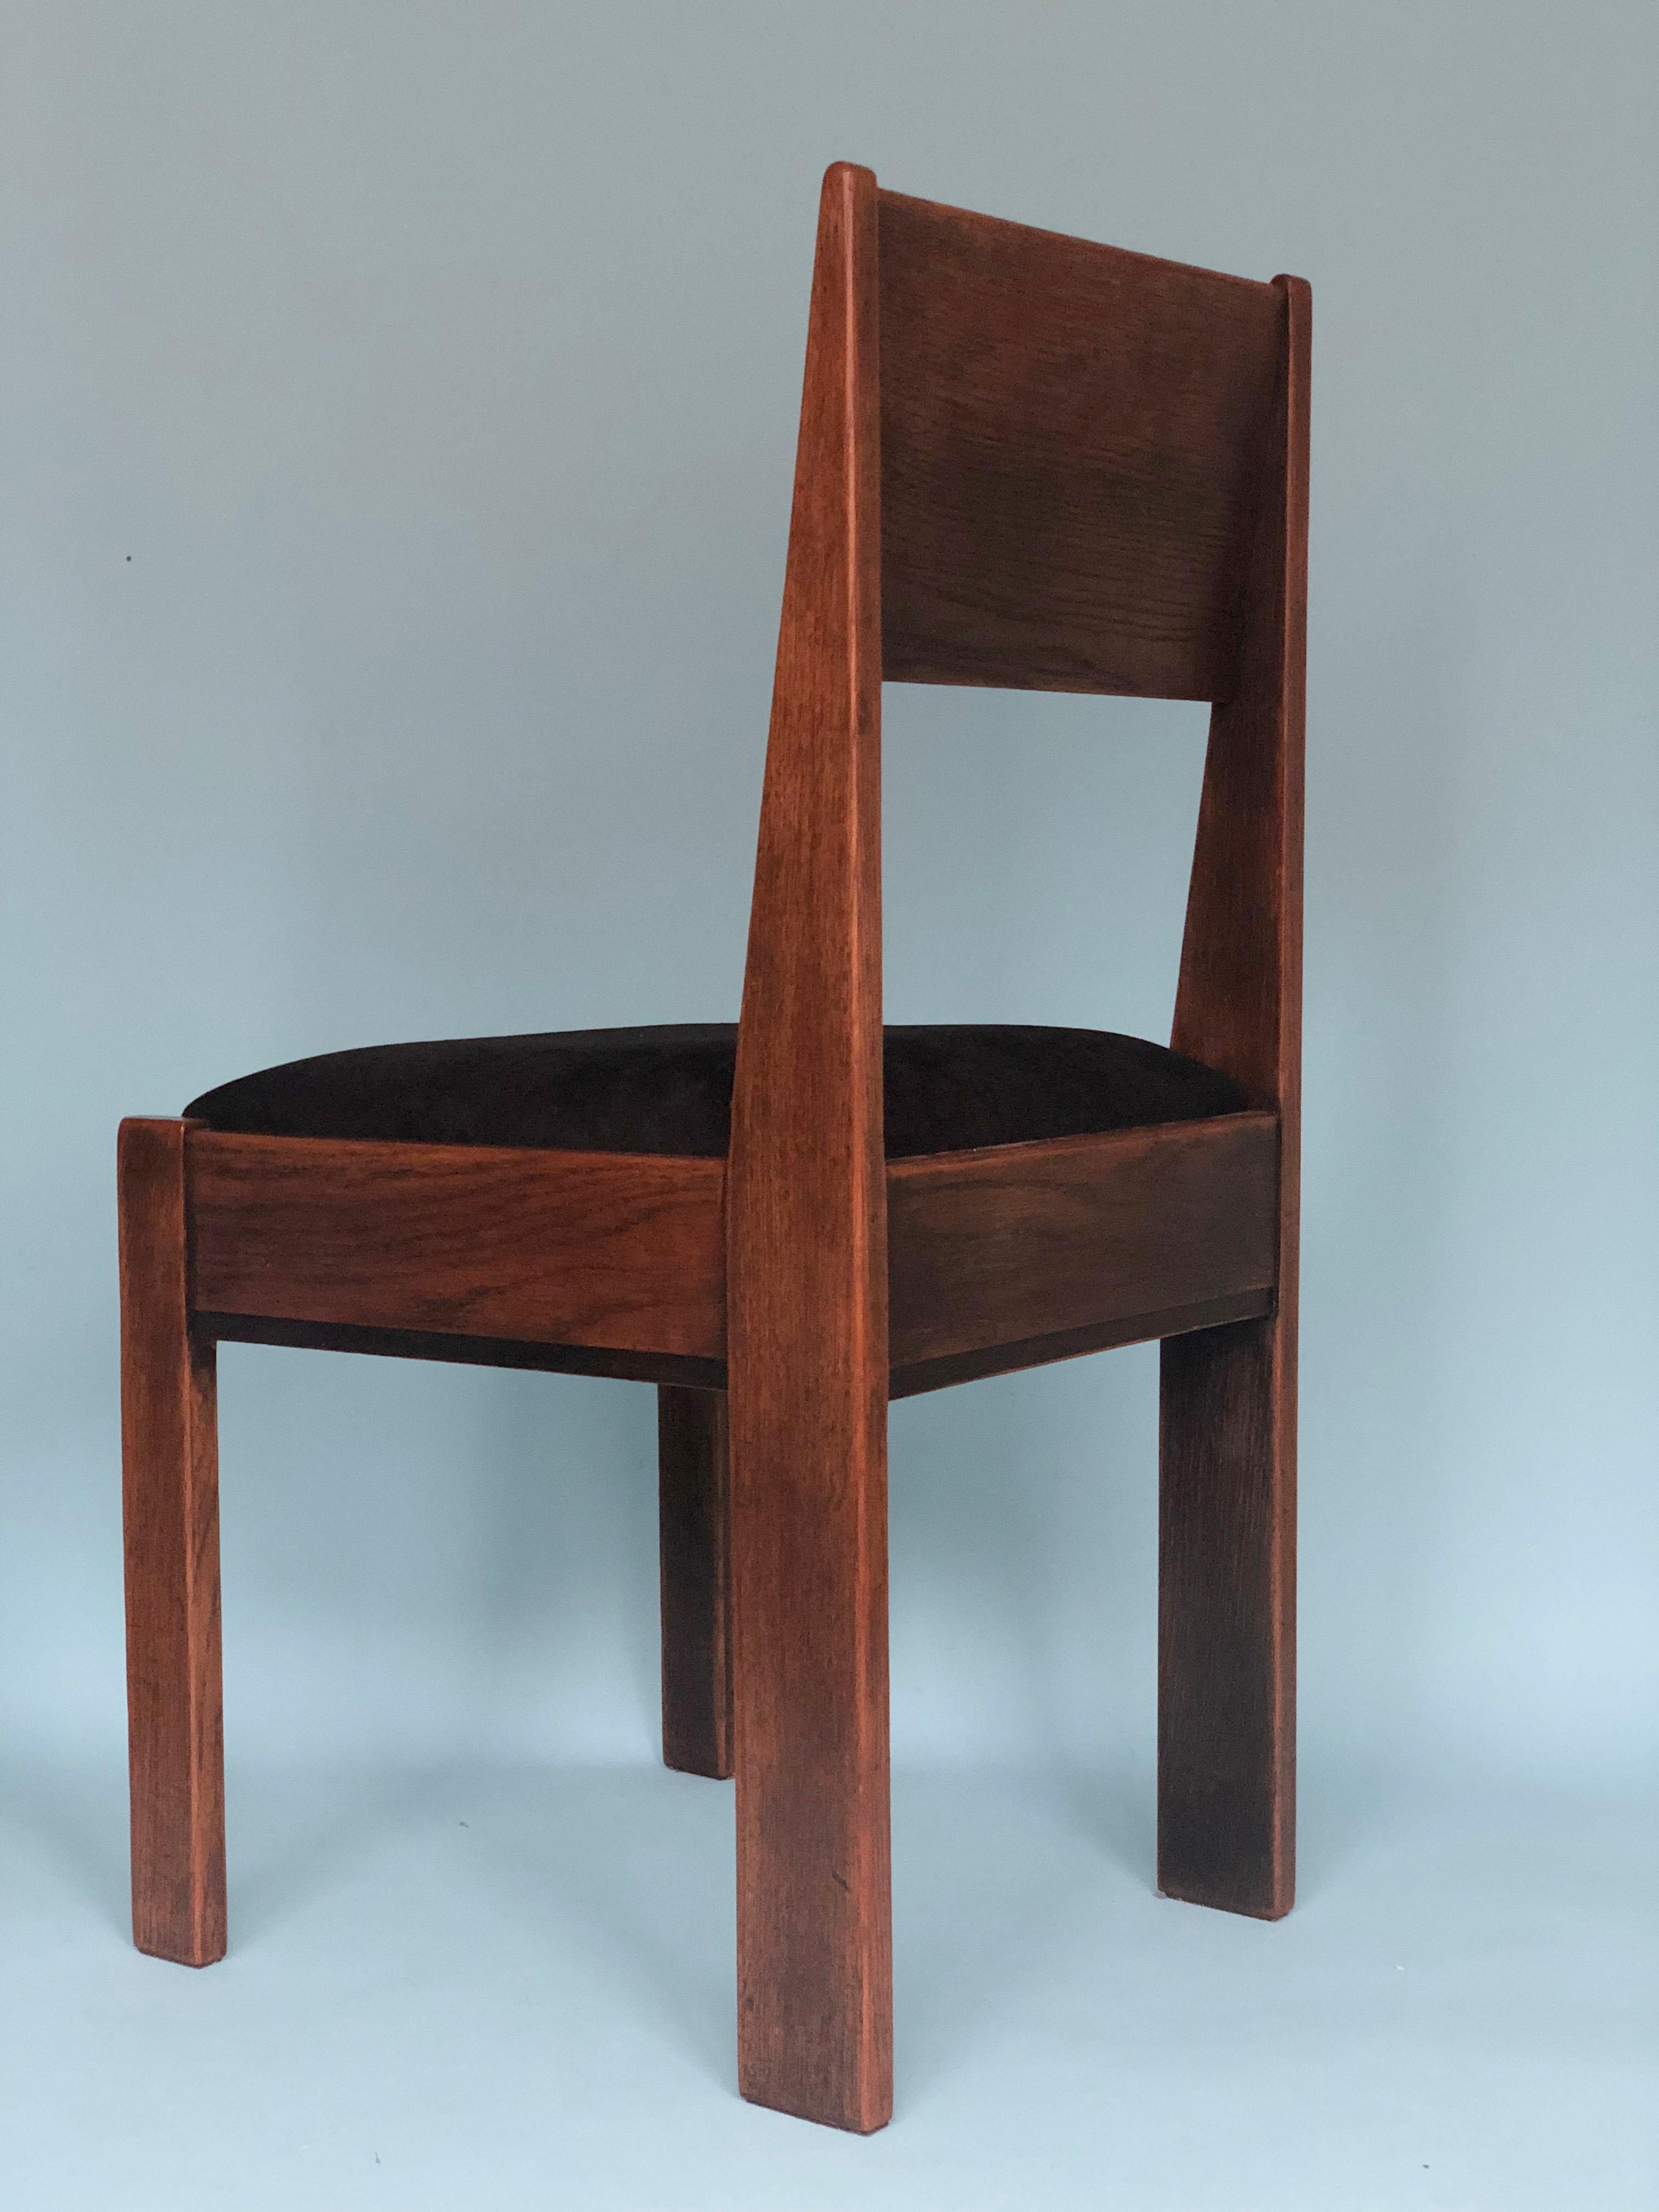 3 sets of 2 available

 A Beautiful shaped design piece. Oak Art Deco chair by J.A. Muntendam for L.O.V. Oosterbeek from the 1920s. The solid chair is polished, marked and the seat is renieuwd and reupholstered in a black rib fabric.

 N.V.